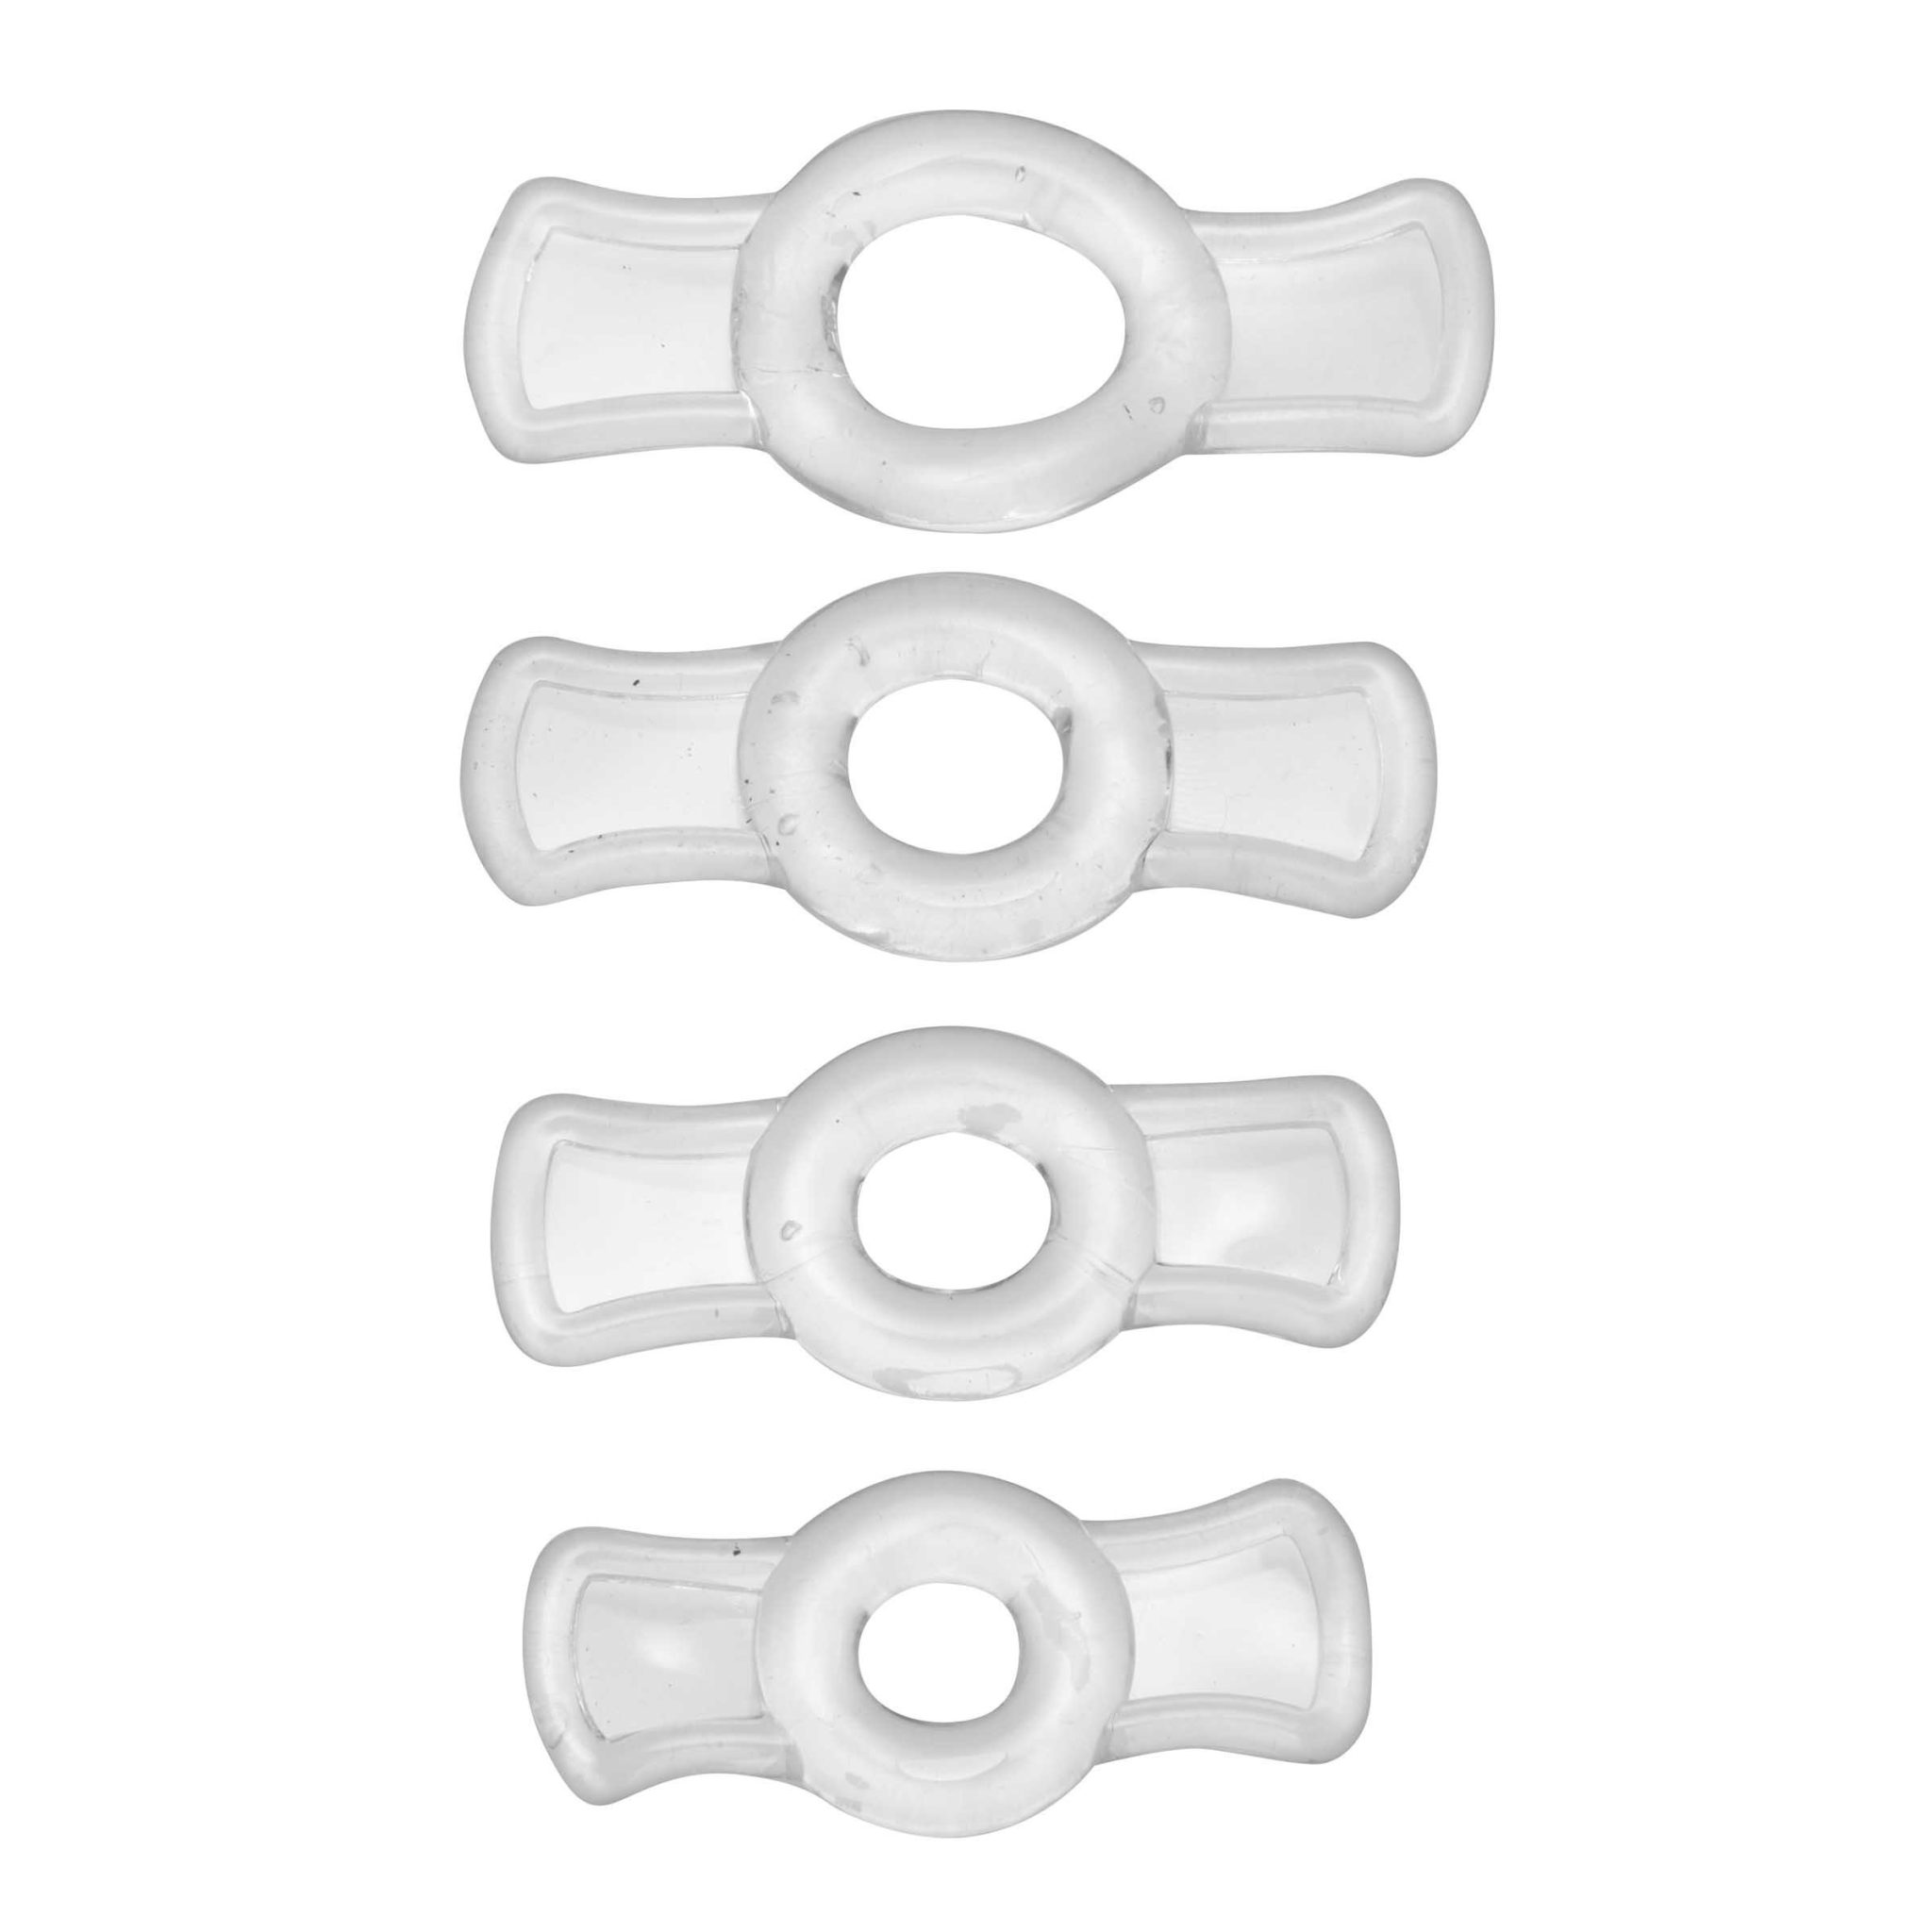 Size Matters Endurance Penis Ring Set – Clear